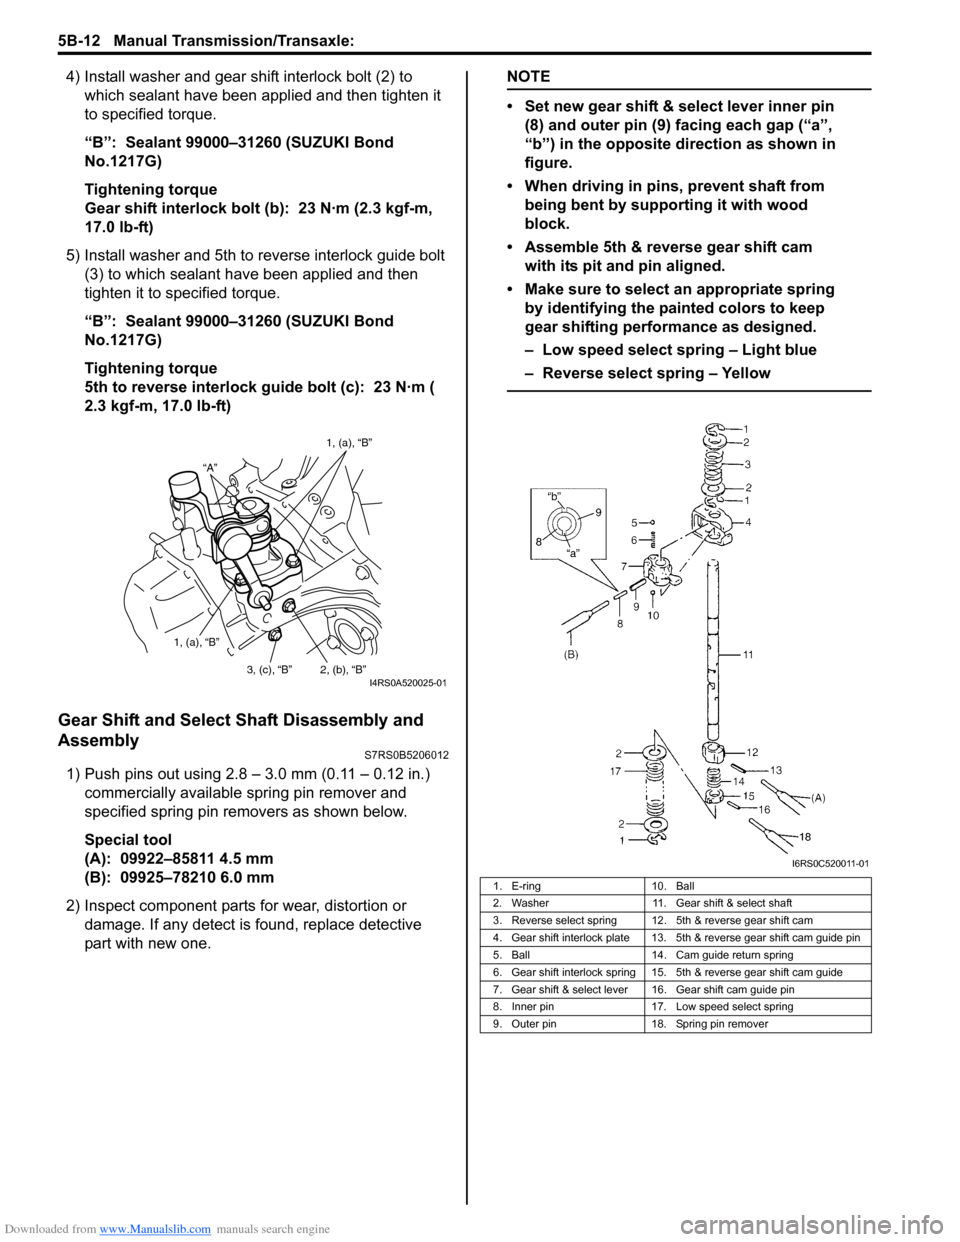 SUZUKI SWIFT 2006 2.G Service User Guide Downloaded from www.Manualslib.com manuals search engine 5B-12 Manual Transmission/Transaxle: 
4) Install washer and gear shift interlock bolt (2) to which sealant have been app lied and then tighten 